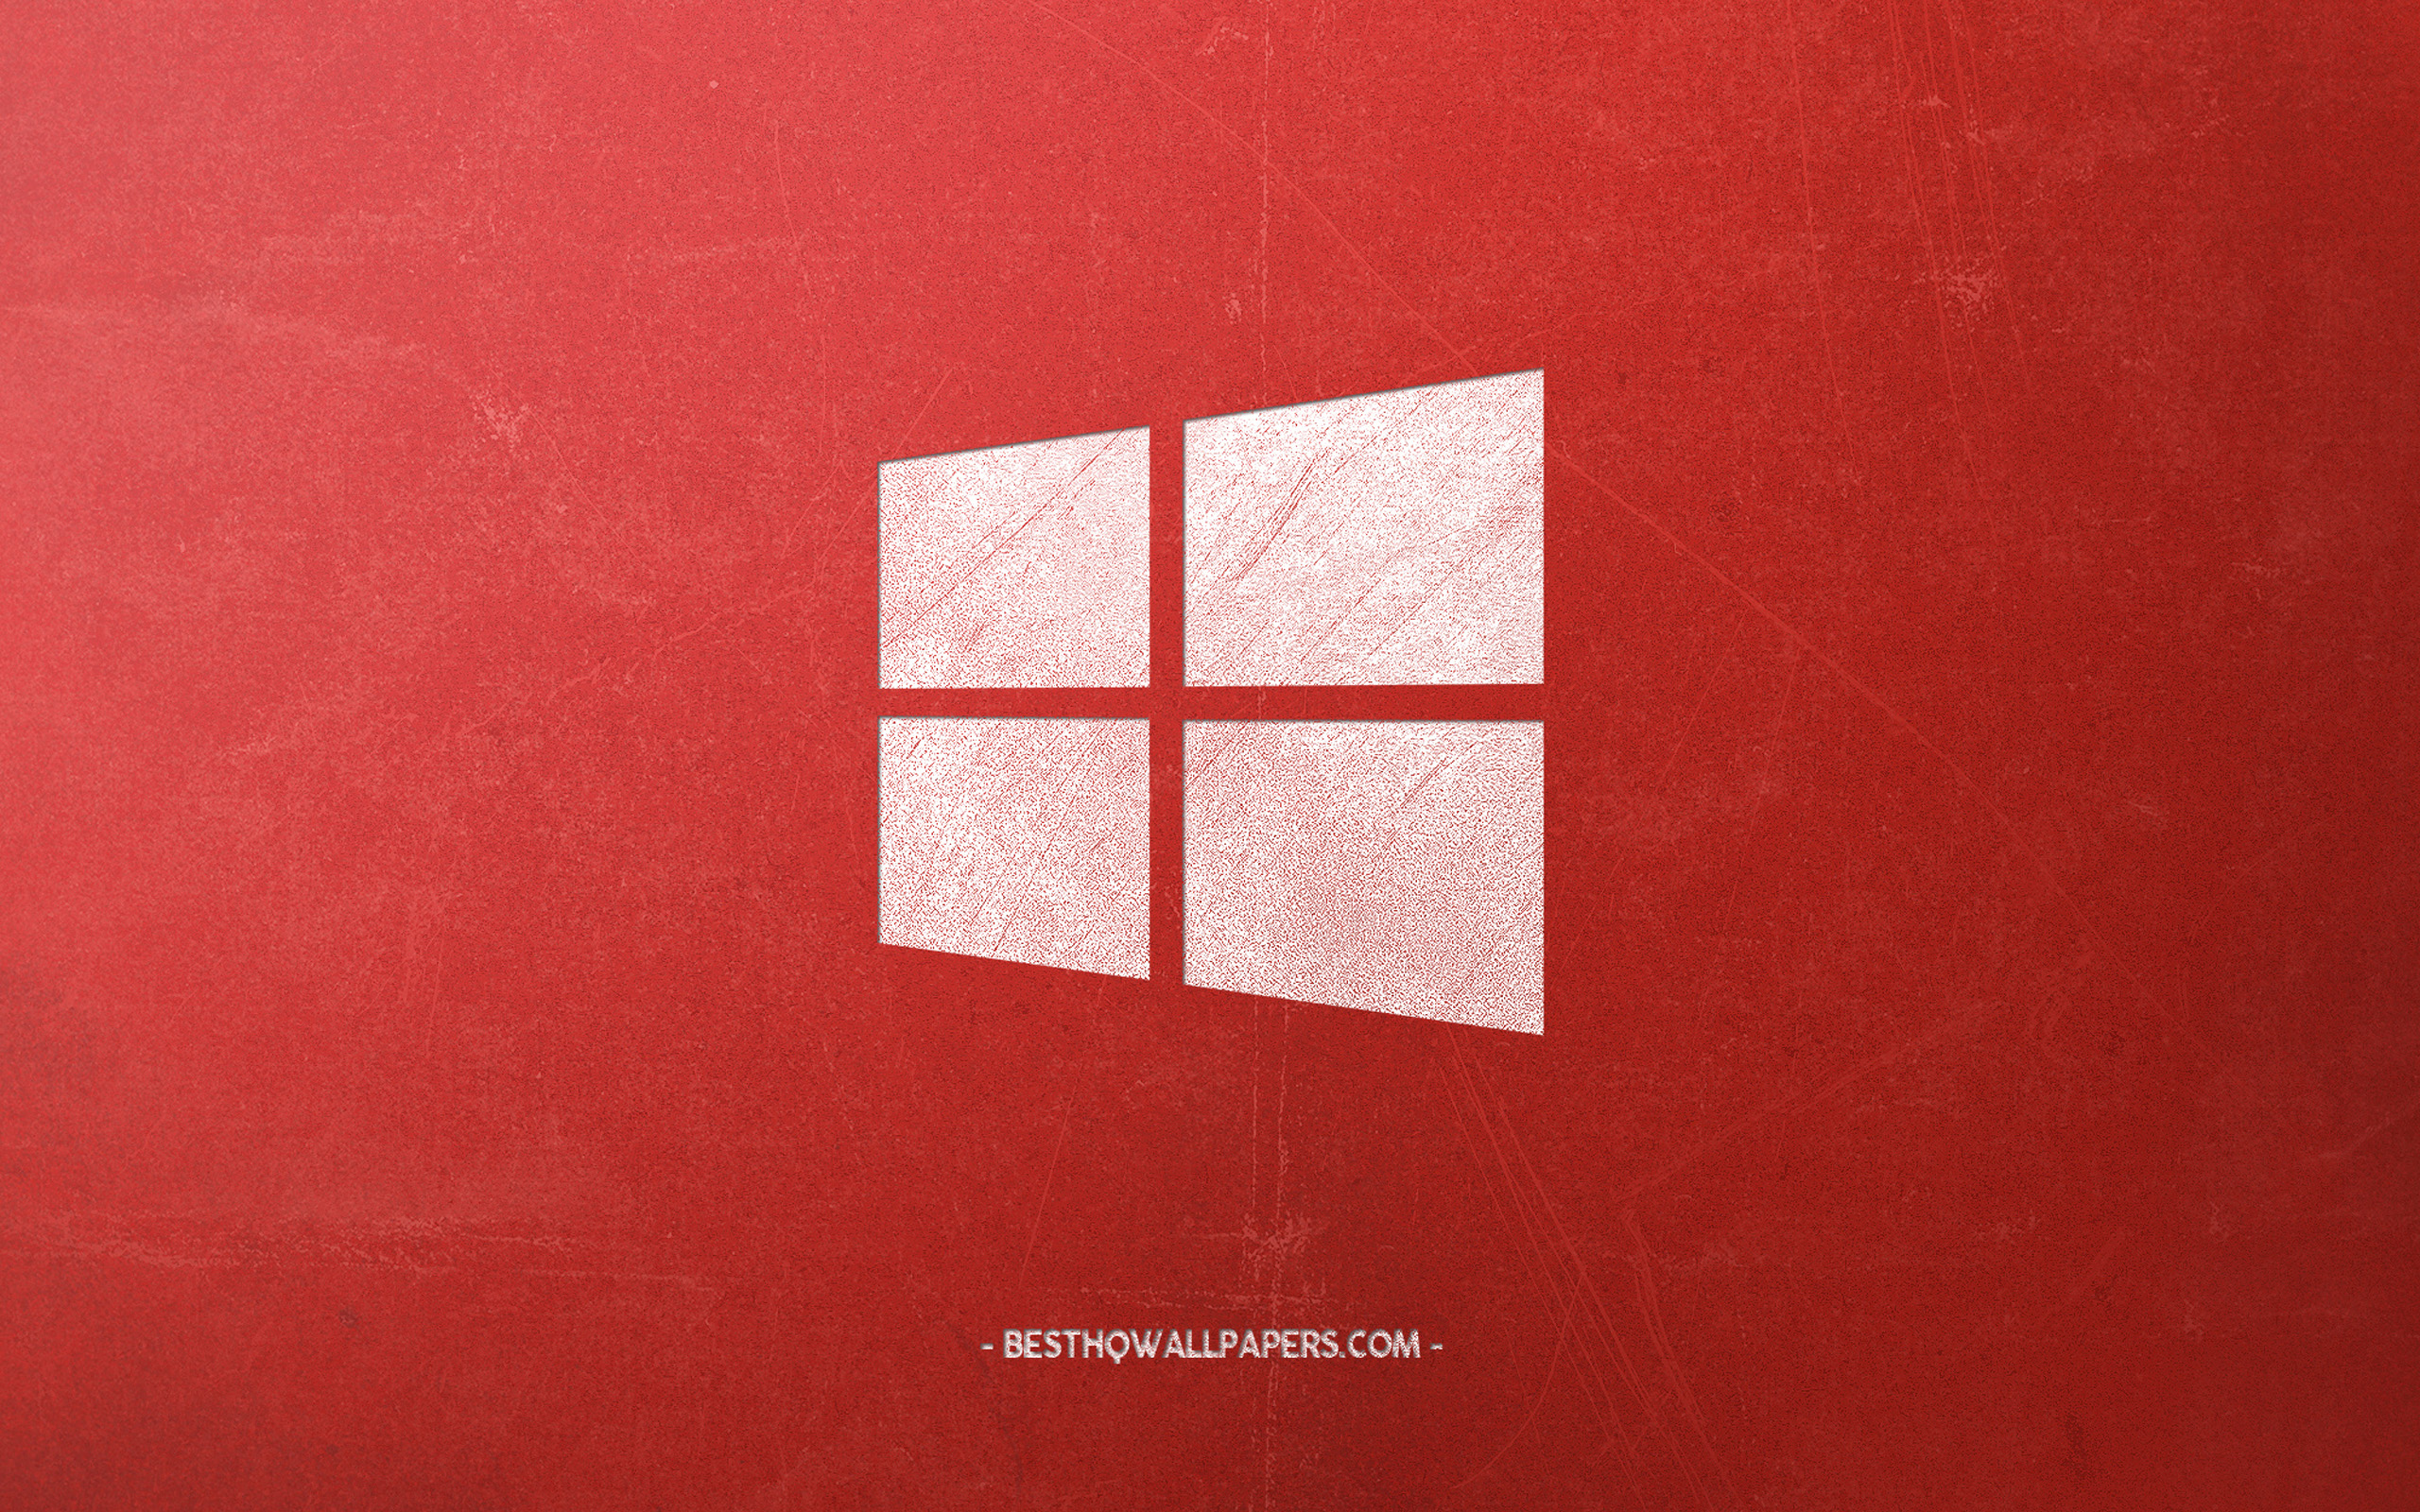 Download wallpaper Windows emblem, retro art, red retro background, creative retro Windows emblem, retro style, W10 logo, Windows for desktop with resolution 2560x1600. High Quality HD picture wallpaper